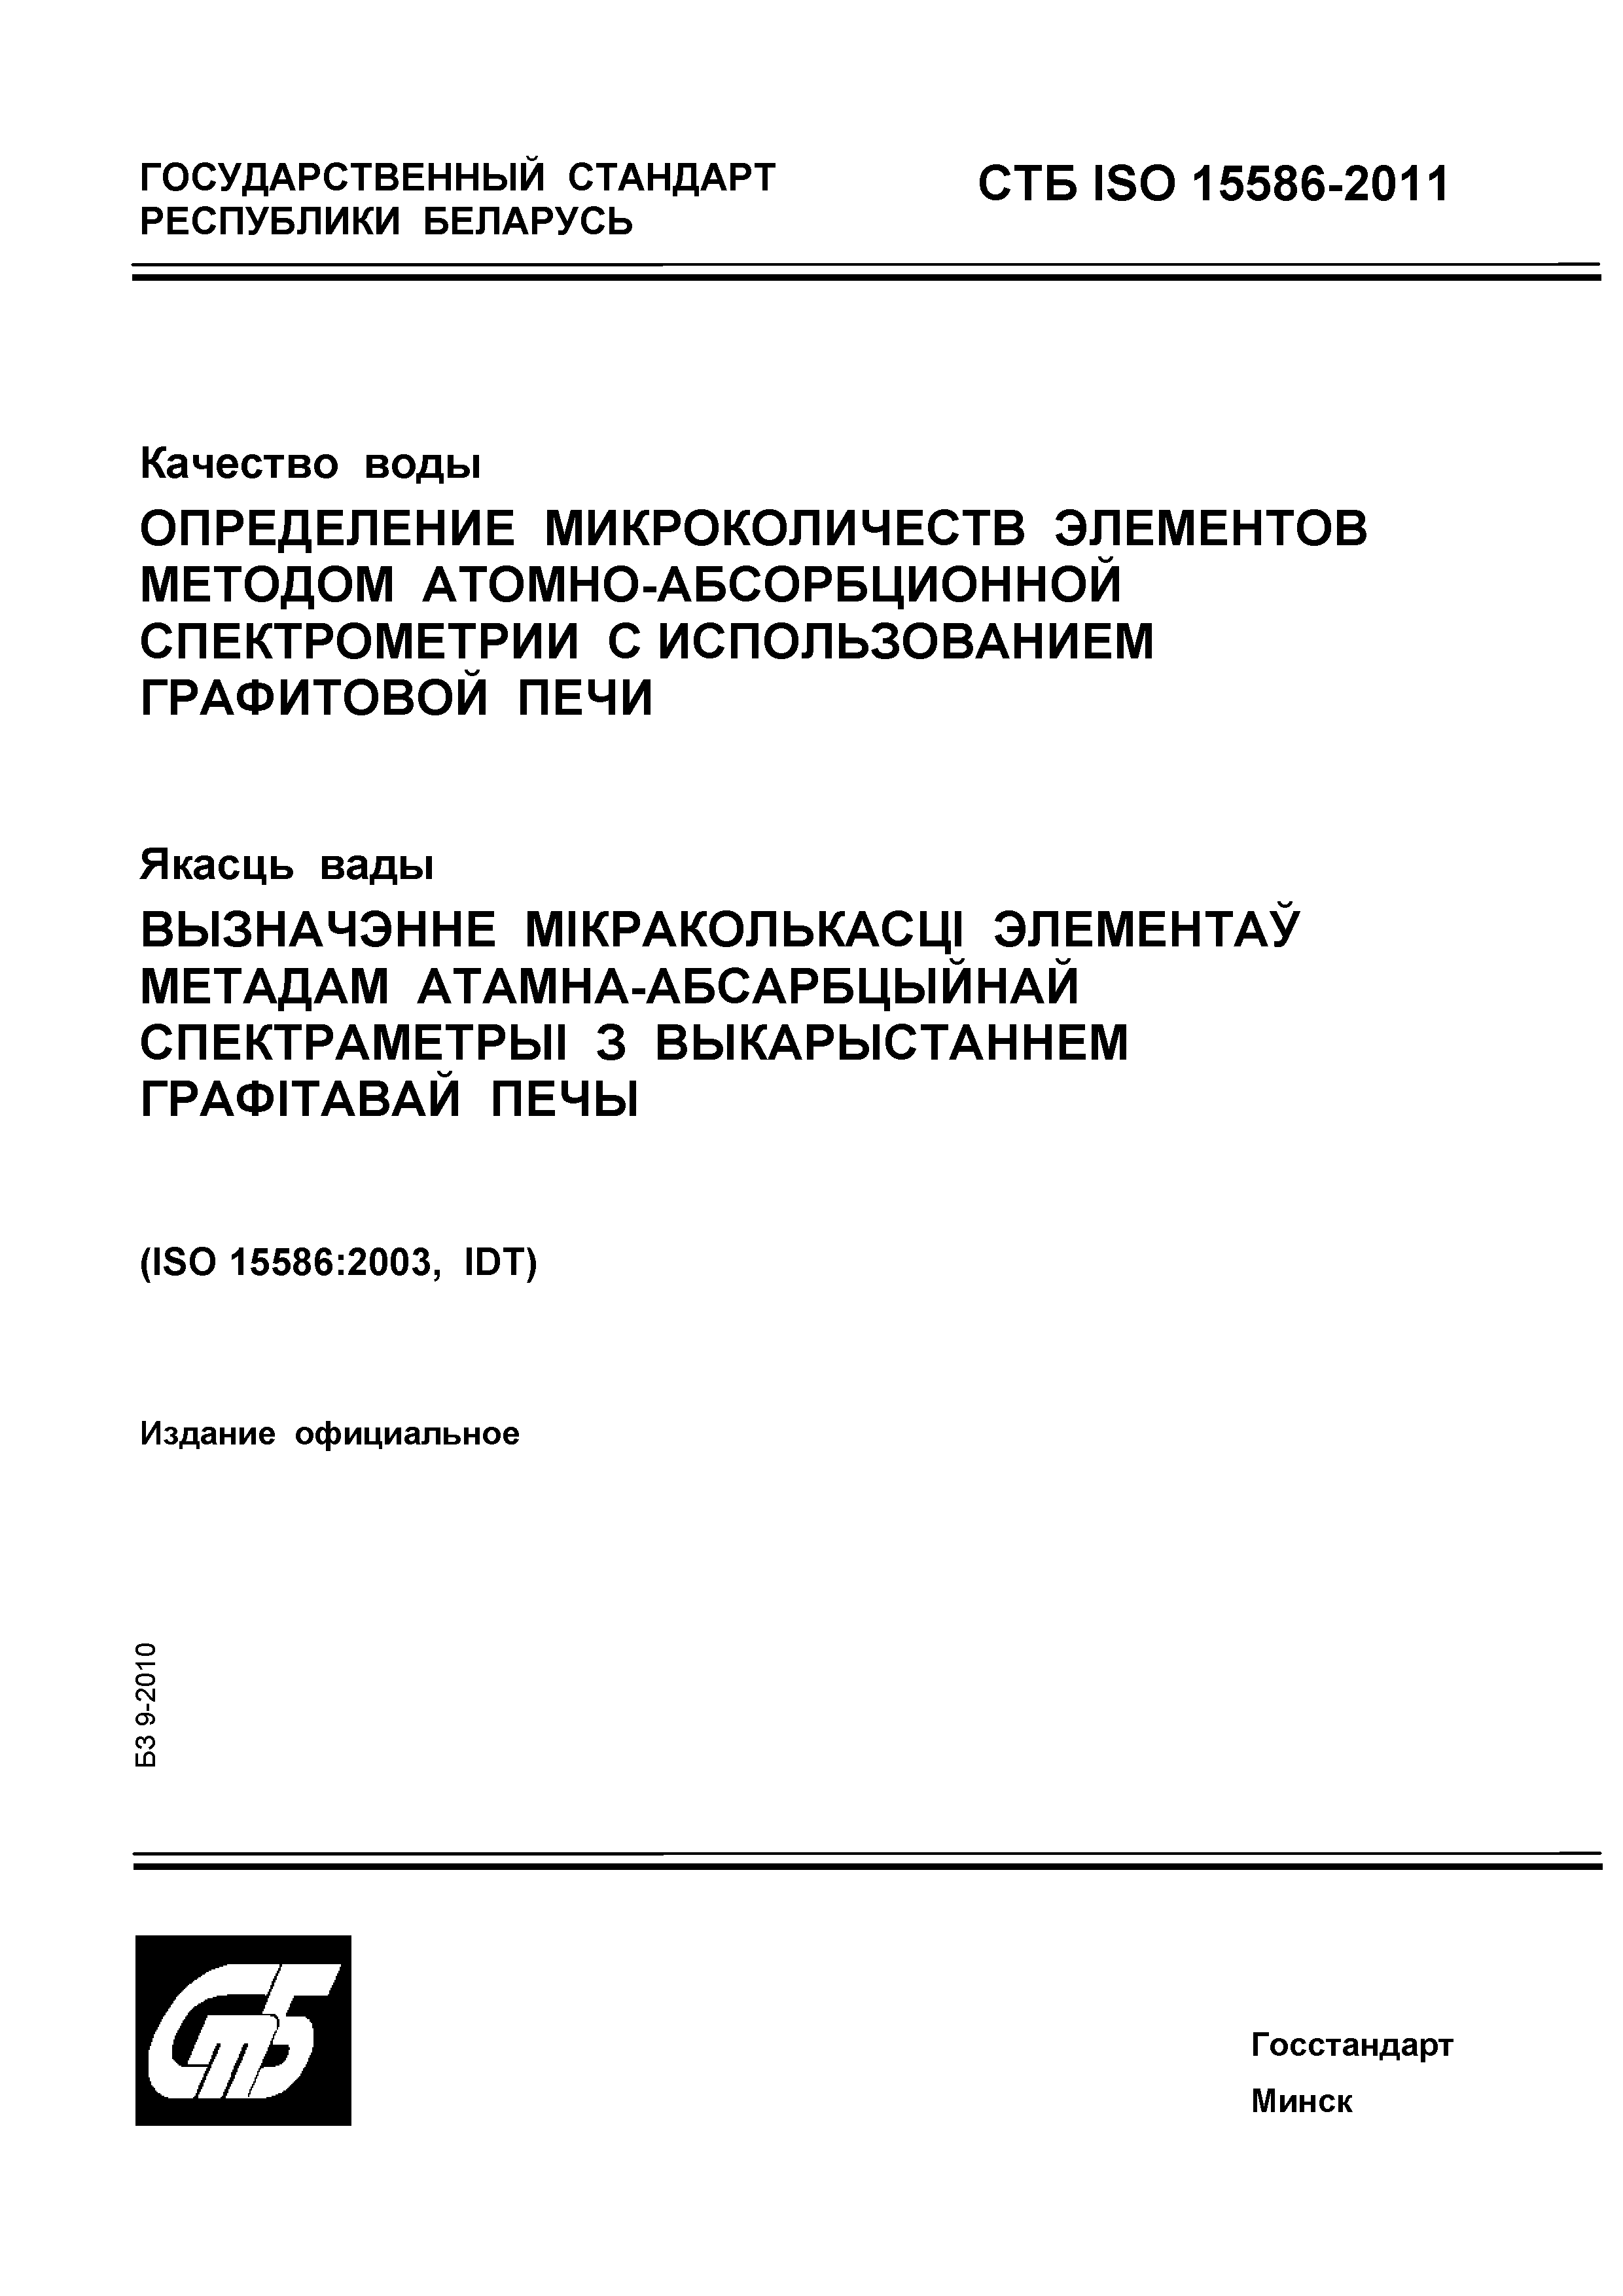 СТБ ISO 15586-2011